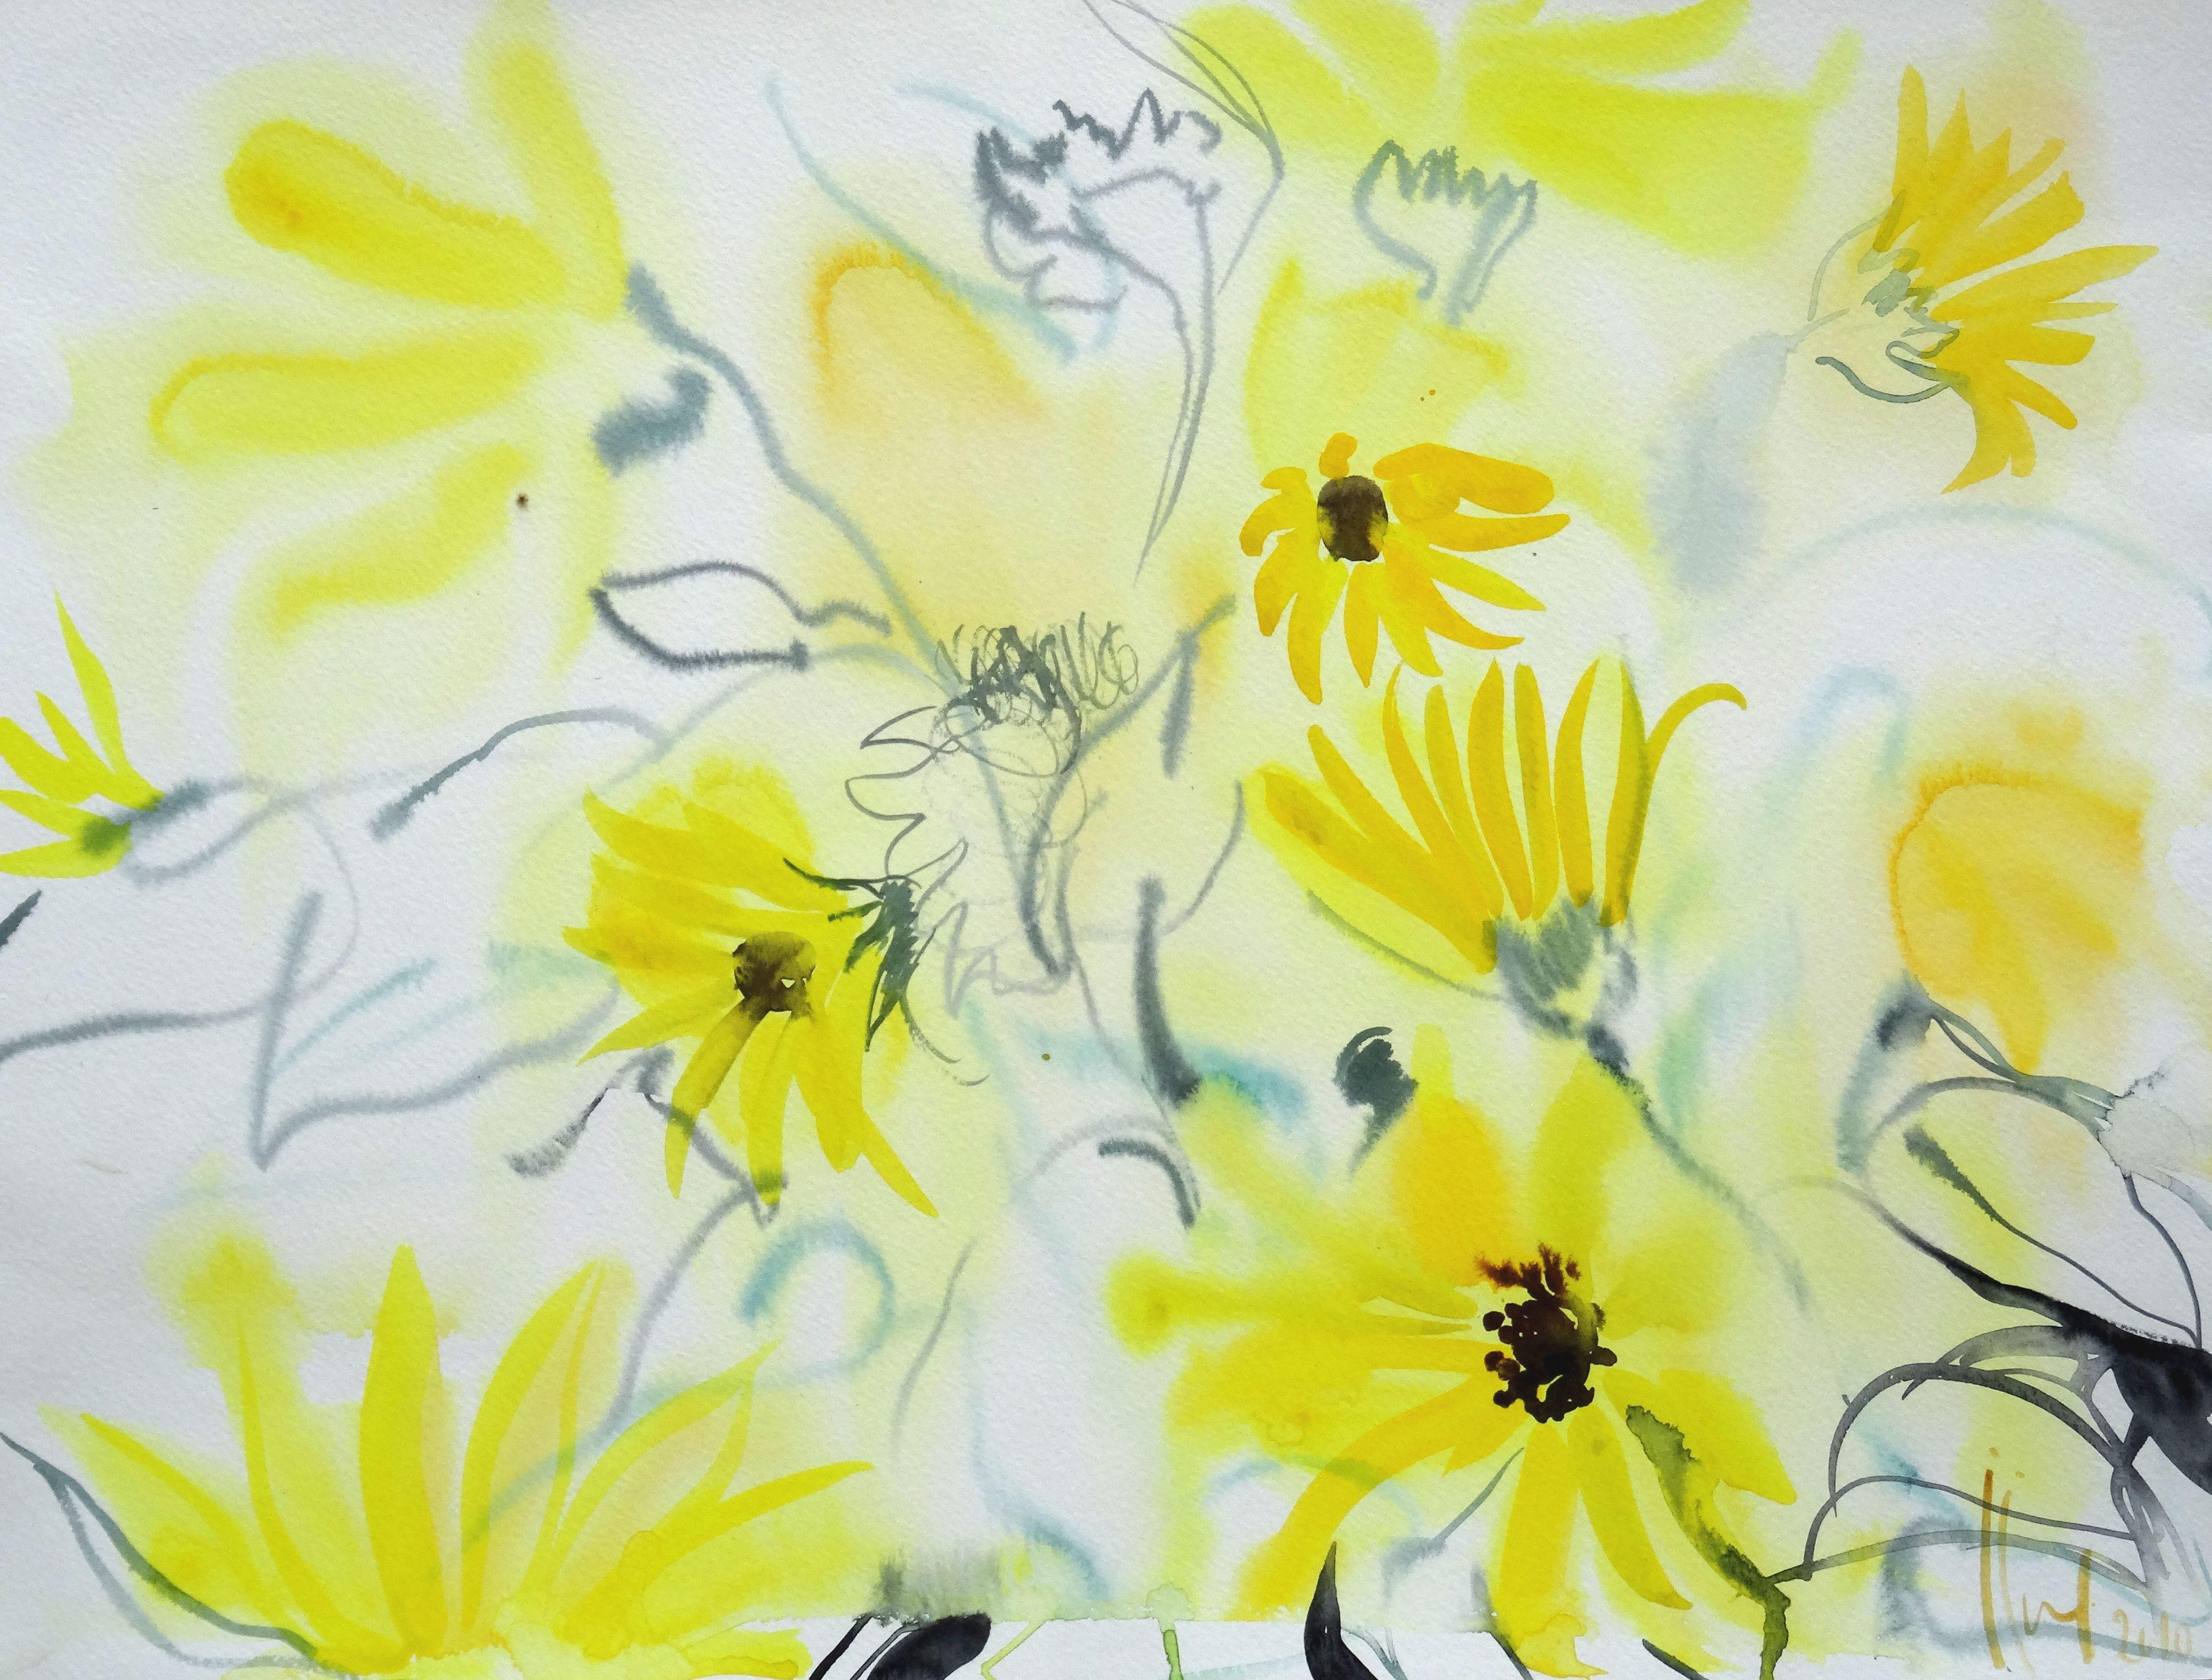 Ingrida Irbe Still-Life - Yellow flowers at Tuileries garden. 2010. Watercolor on paper, 24x50 cm